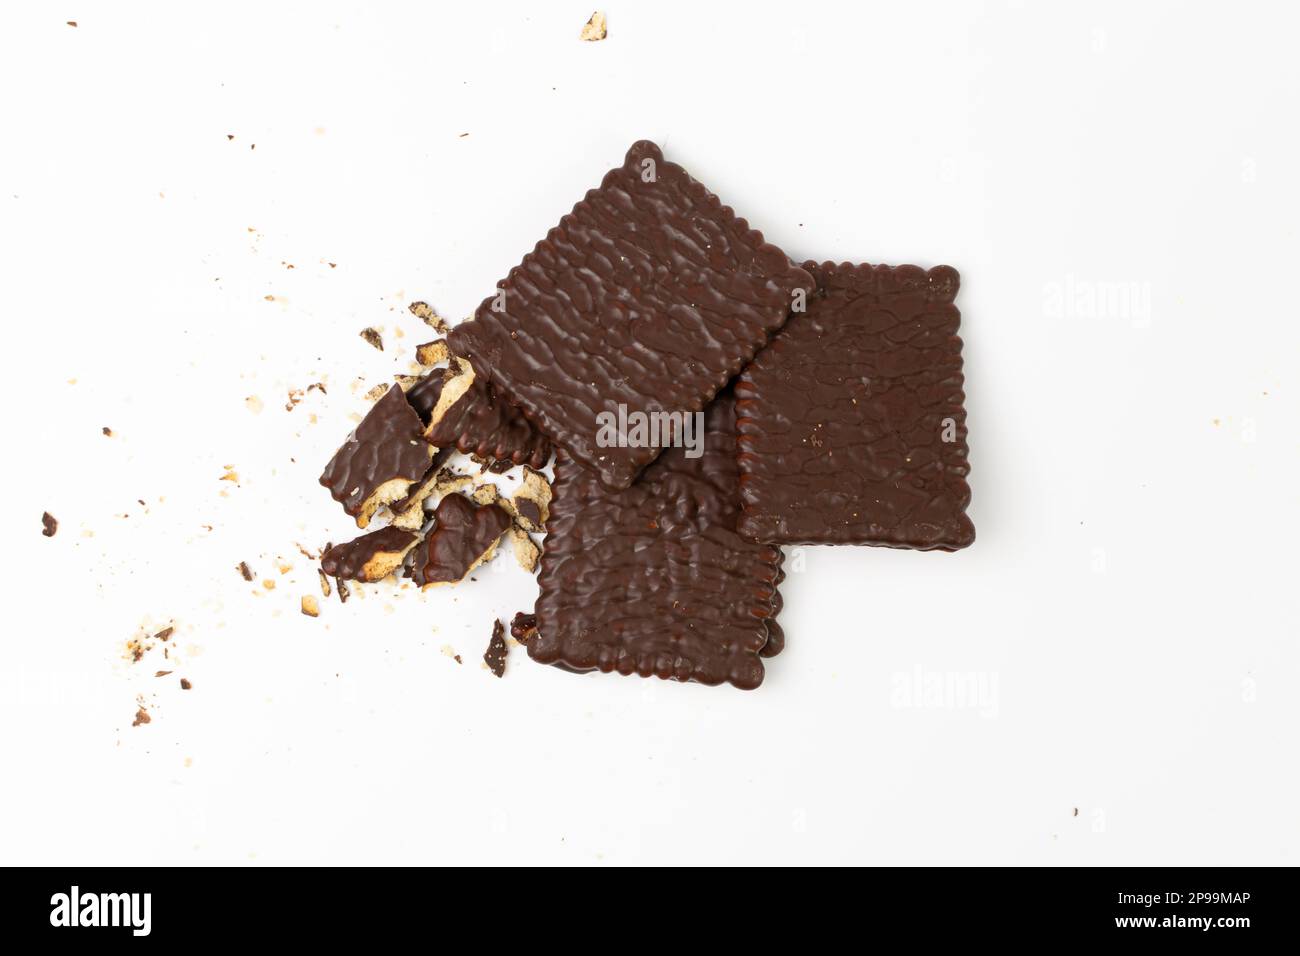 Broken Biscuit Coated in Dark Chocolate Isolated, Crumbled Square Cookies, Rectangular Shortbread Pieces, Crunchy Digestive Cookie Bites, Crumbs on Wh Stock Photo